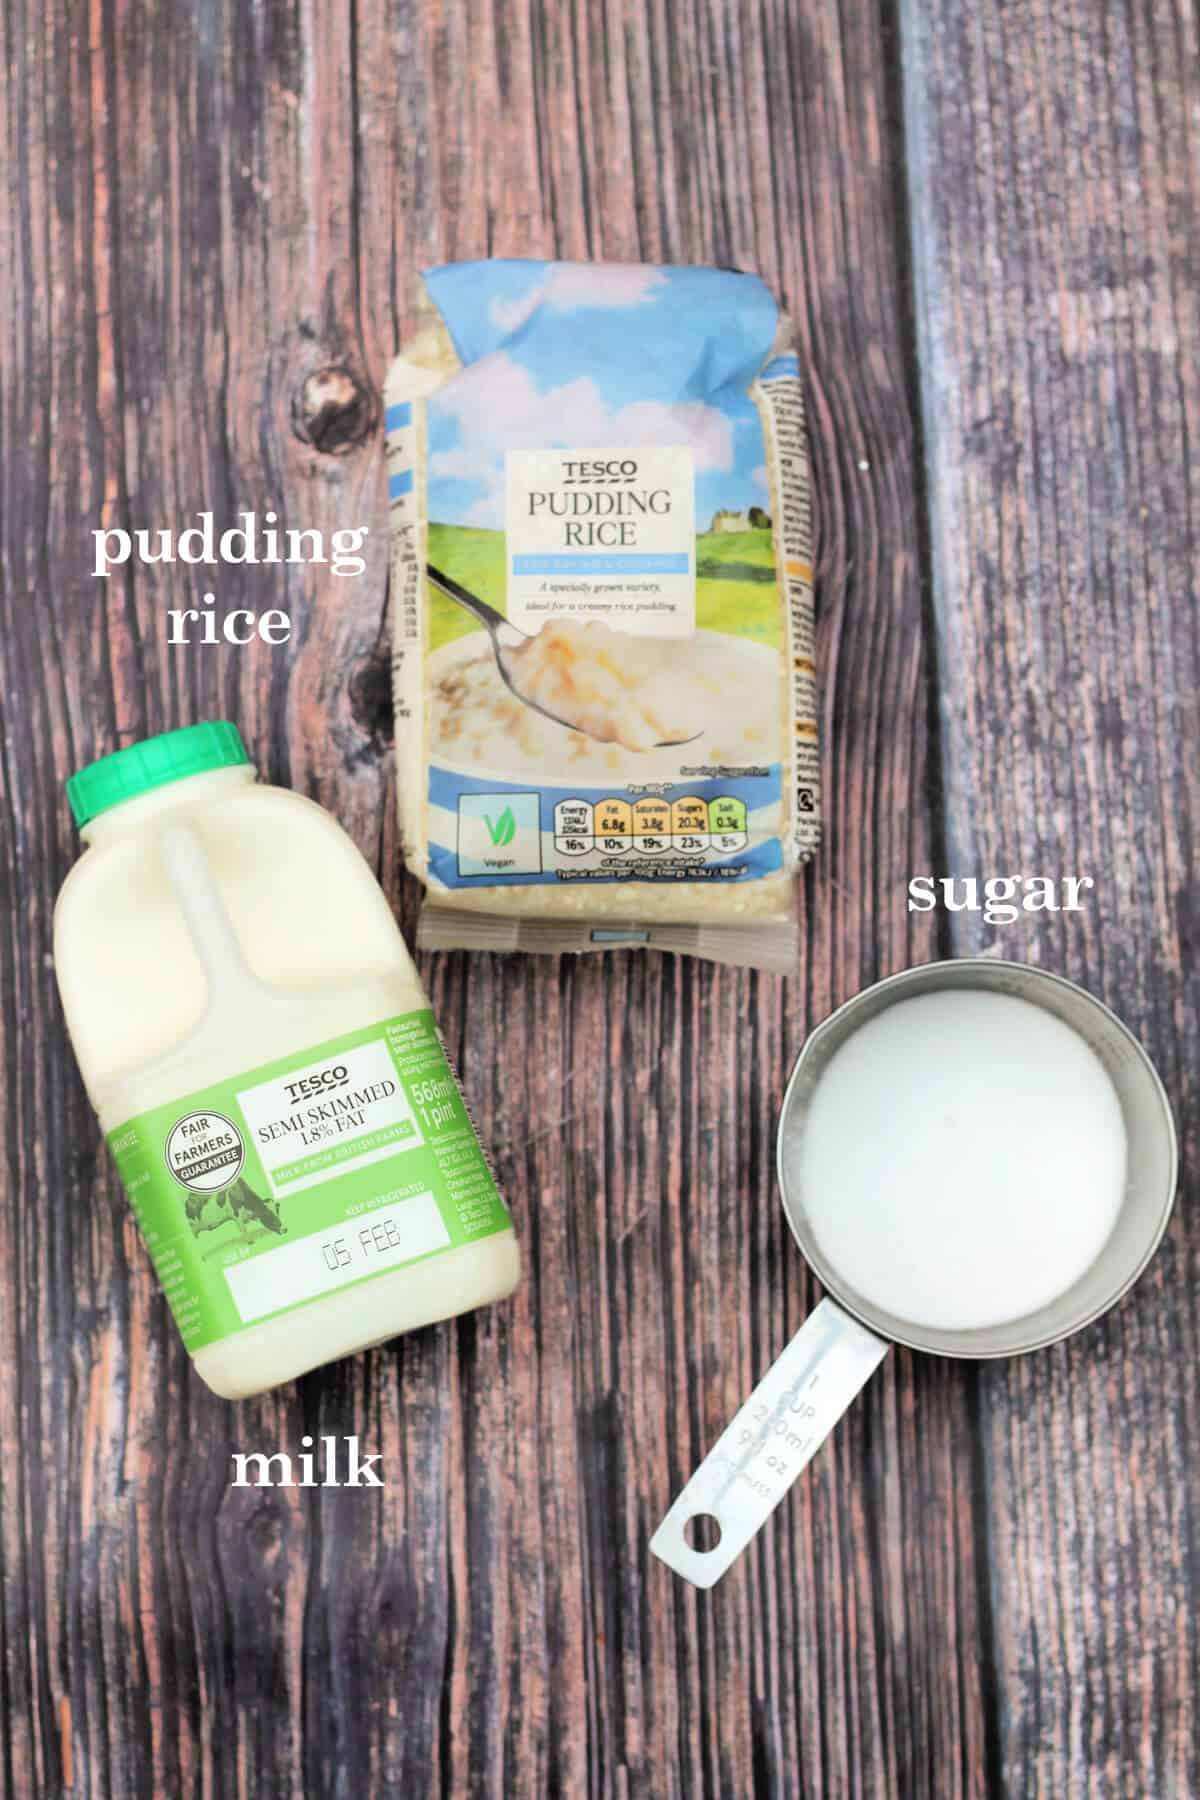 Ingredients labelled pudding rice, milk and sugar on wooden table.